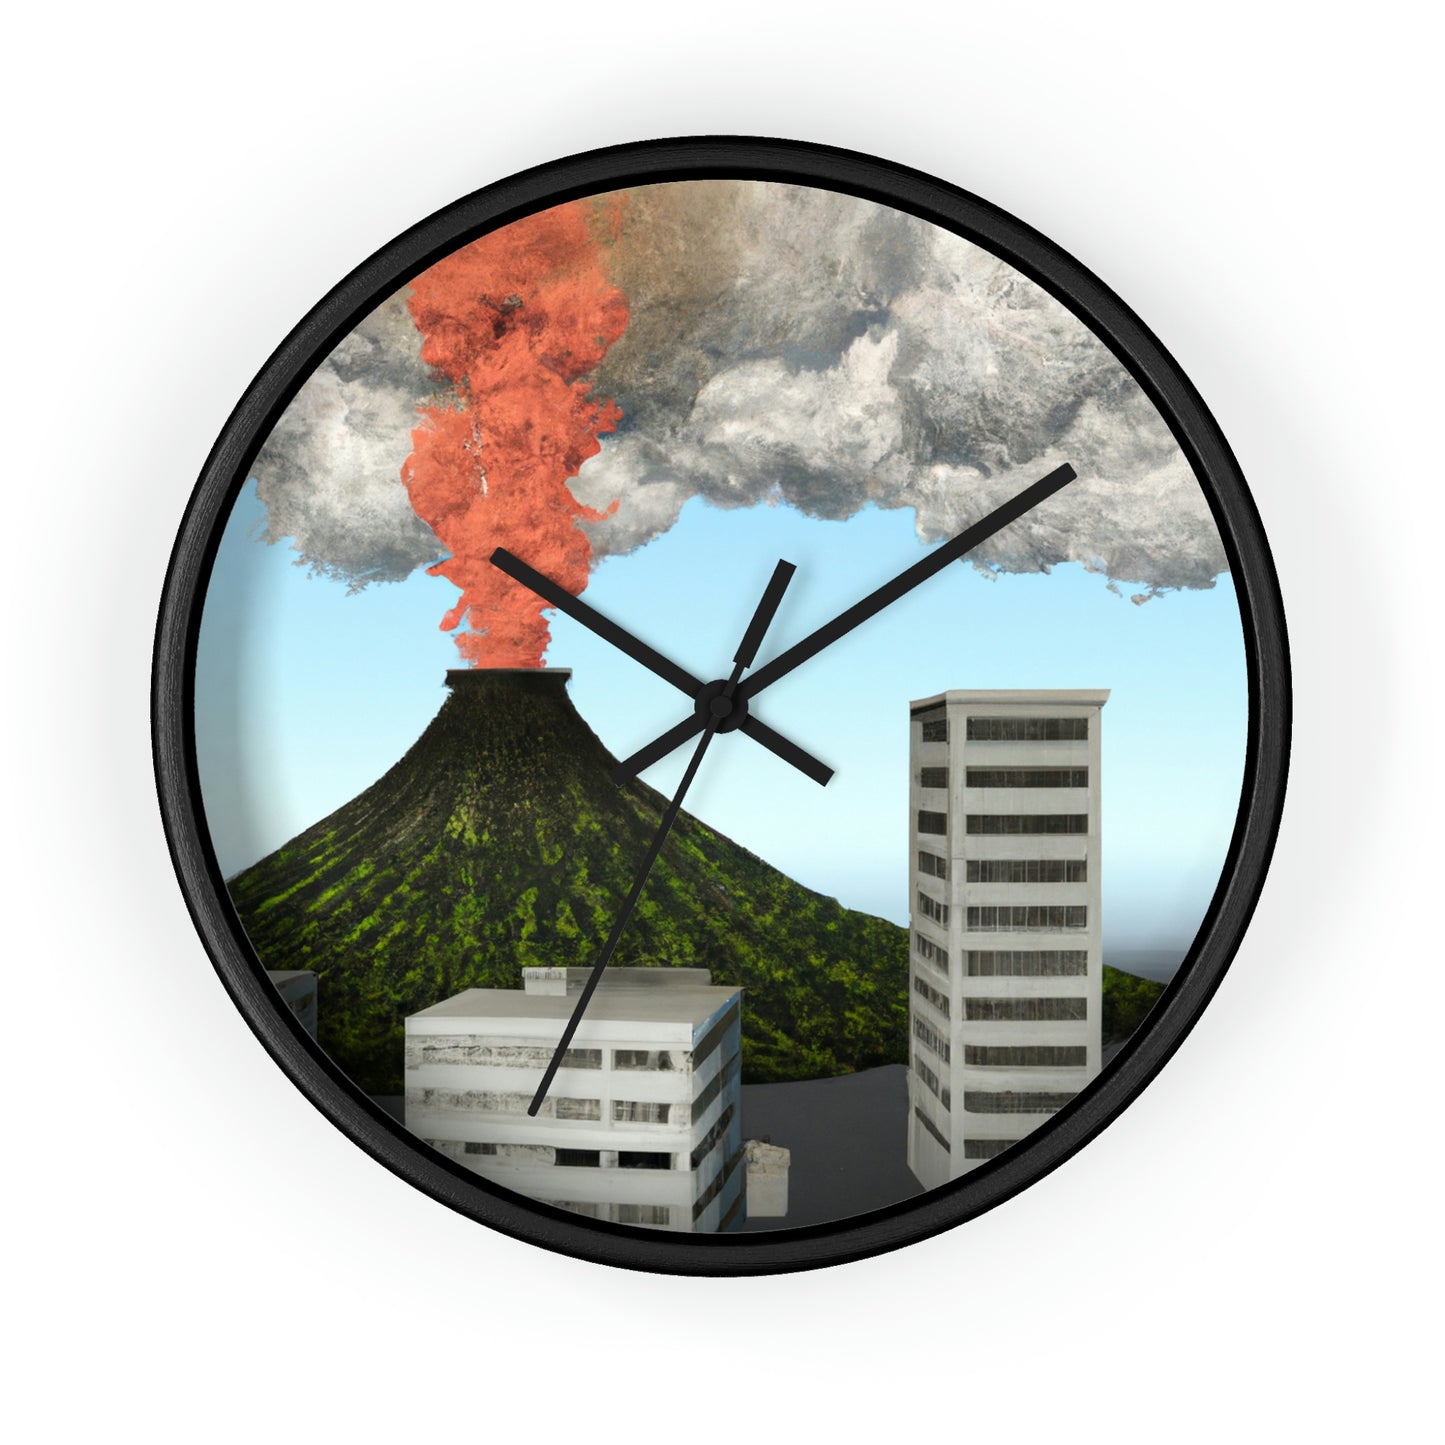 "The Eruption in the Tech Capital" - The Alien Wall Clock